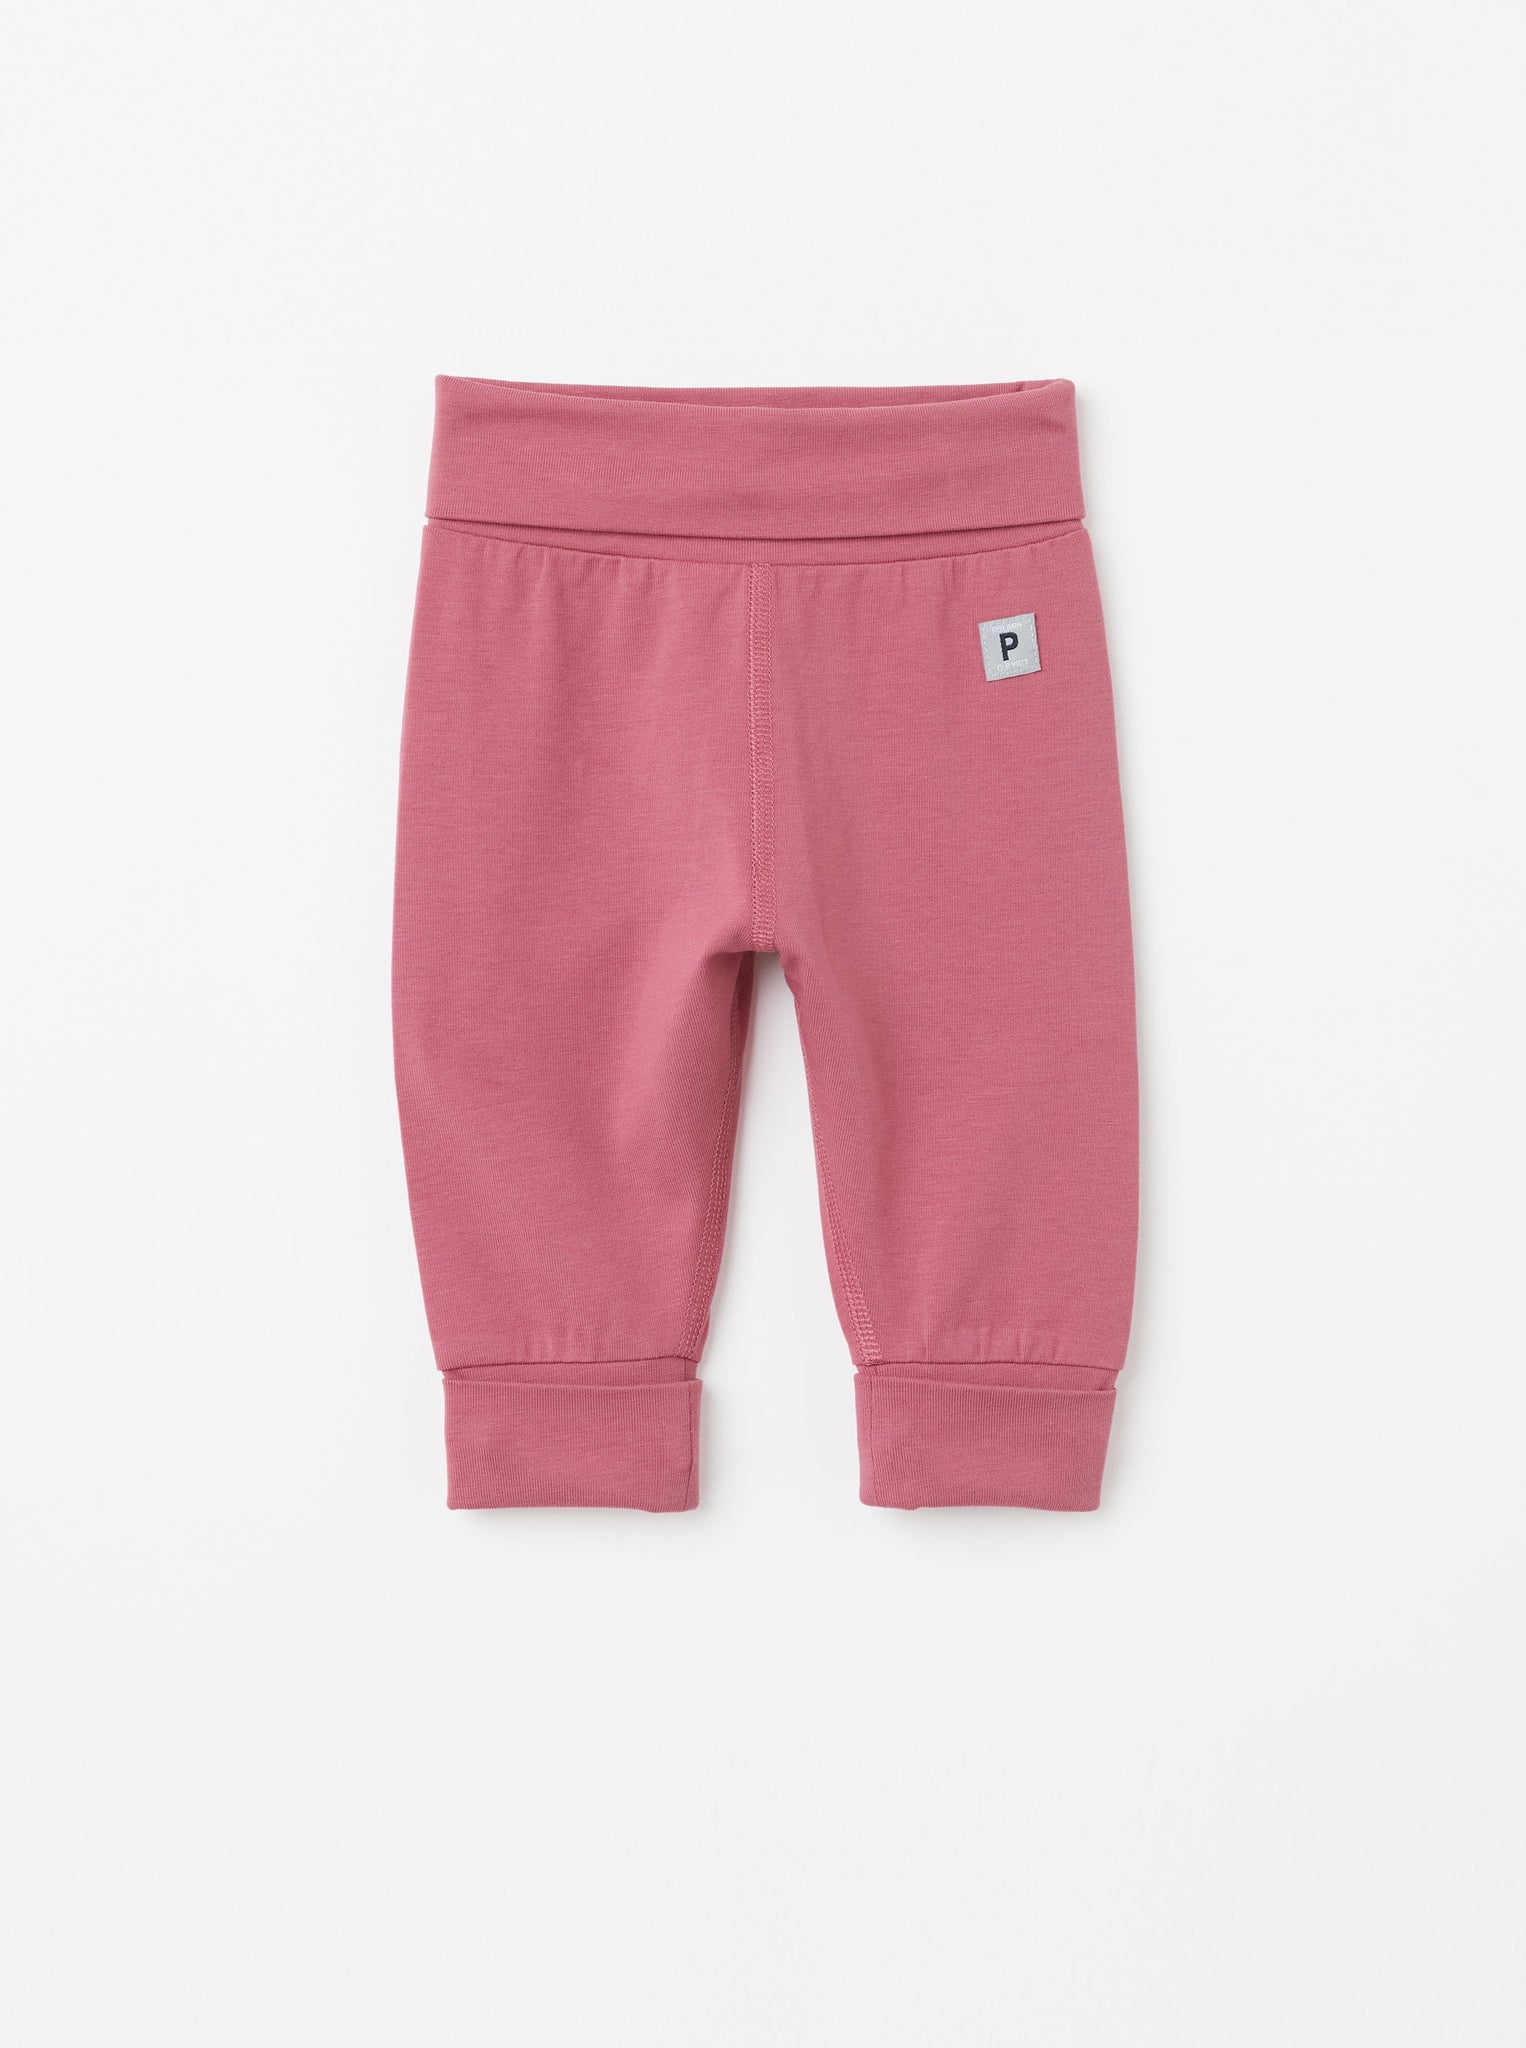 Organic Cotton Pink Baby Leggings from the Polarn O. Pyret Kidswear collection. The best ethical kids clothes